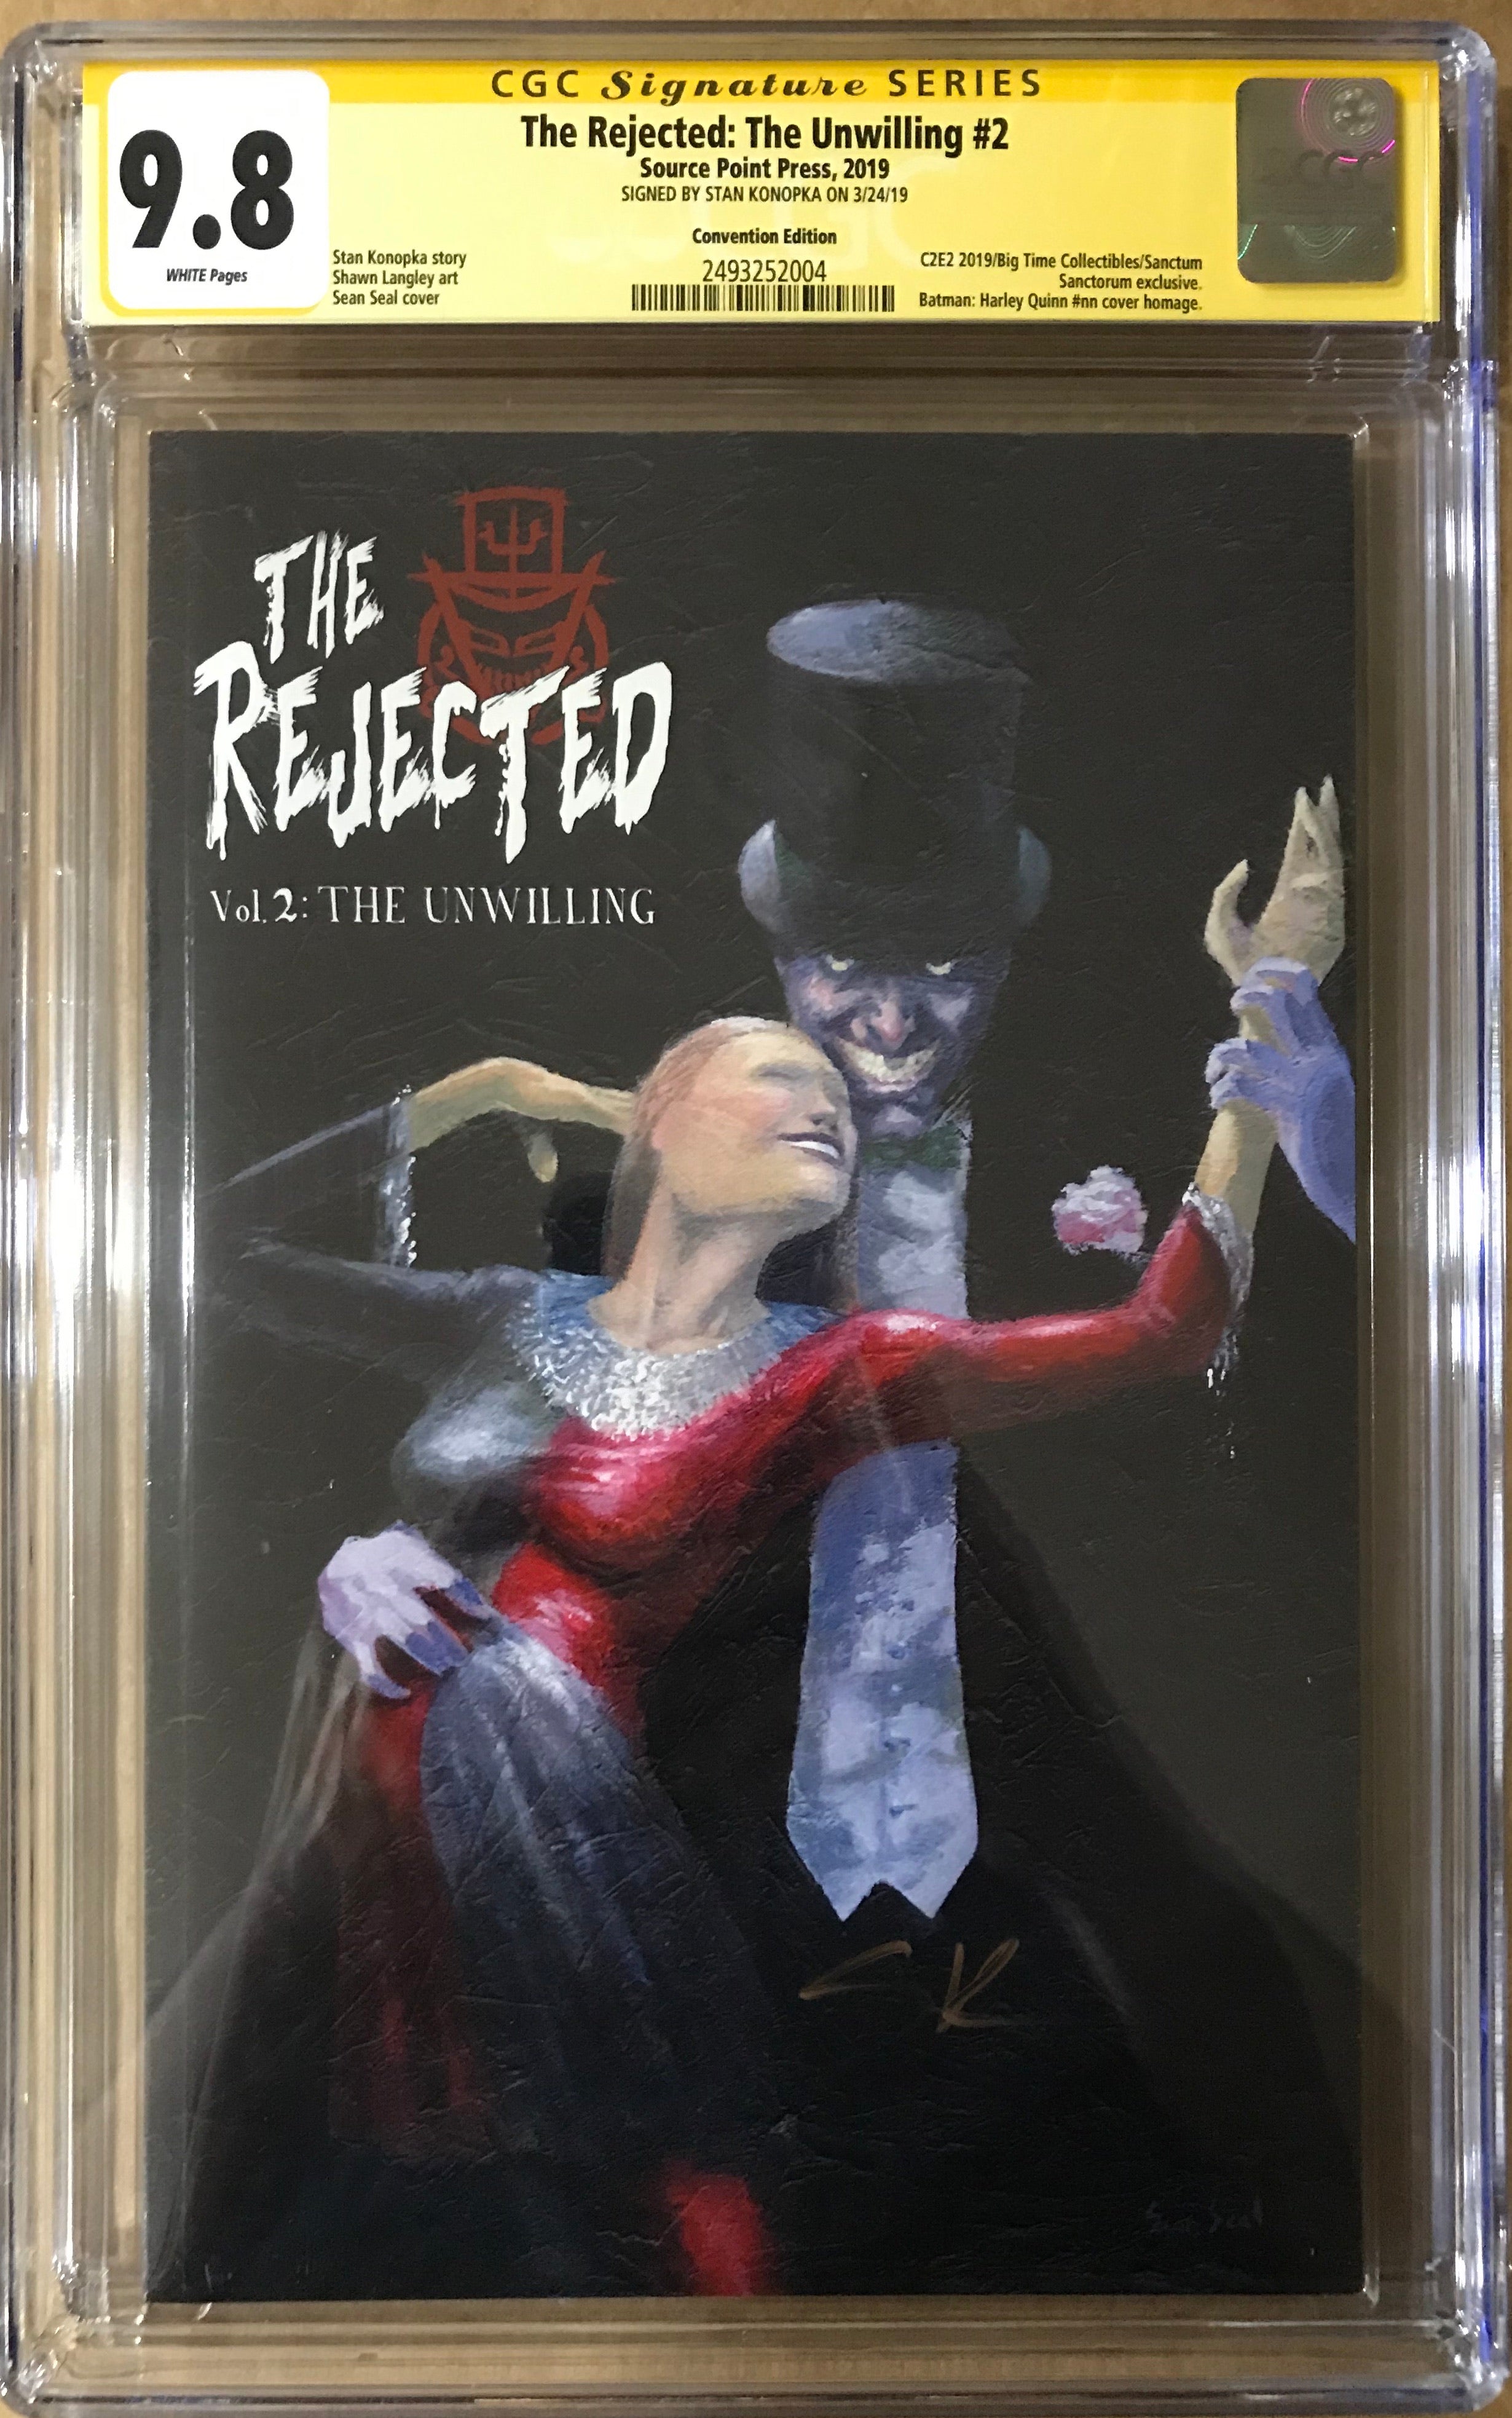 REJECTED THE UNWILLING #1 CGC 9.8 SIGNED BY STAN KONOPKA